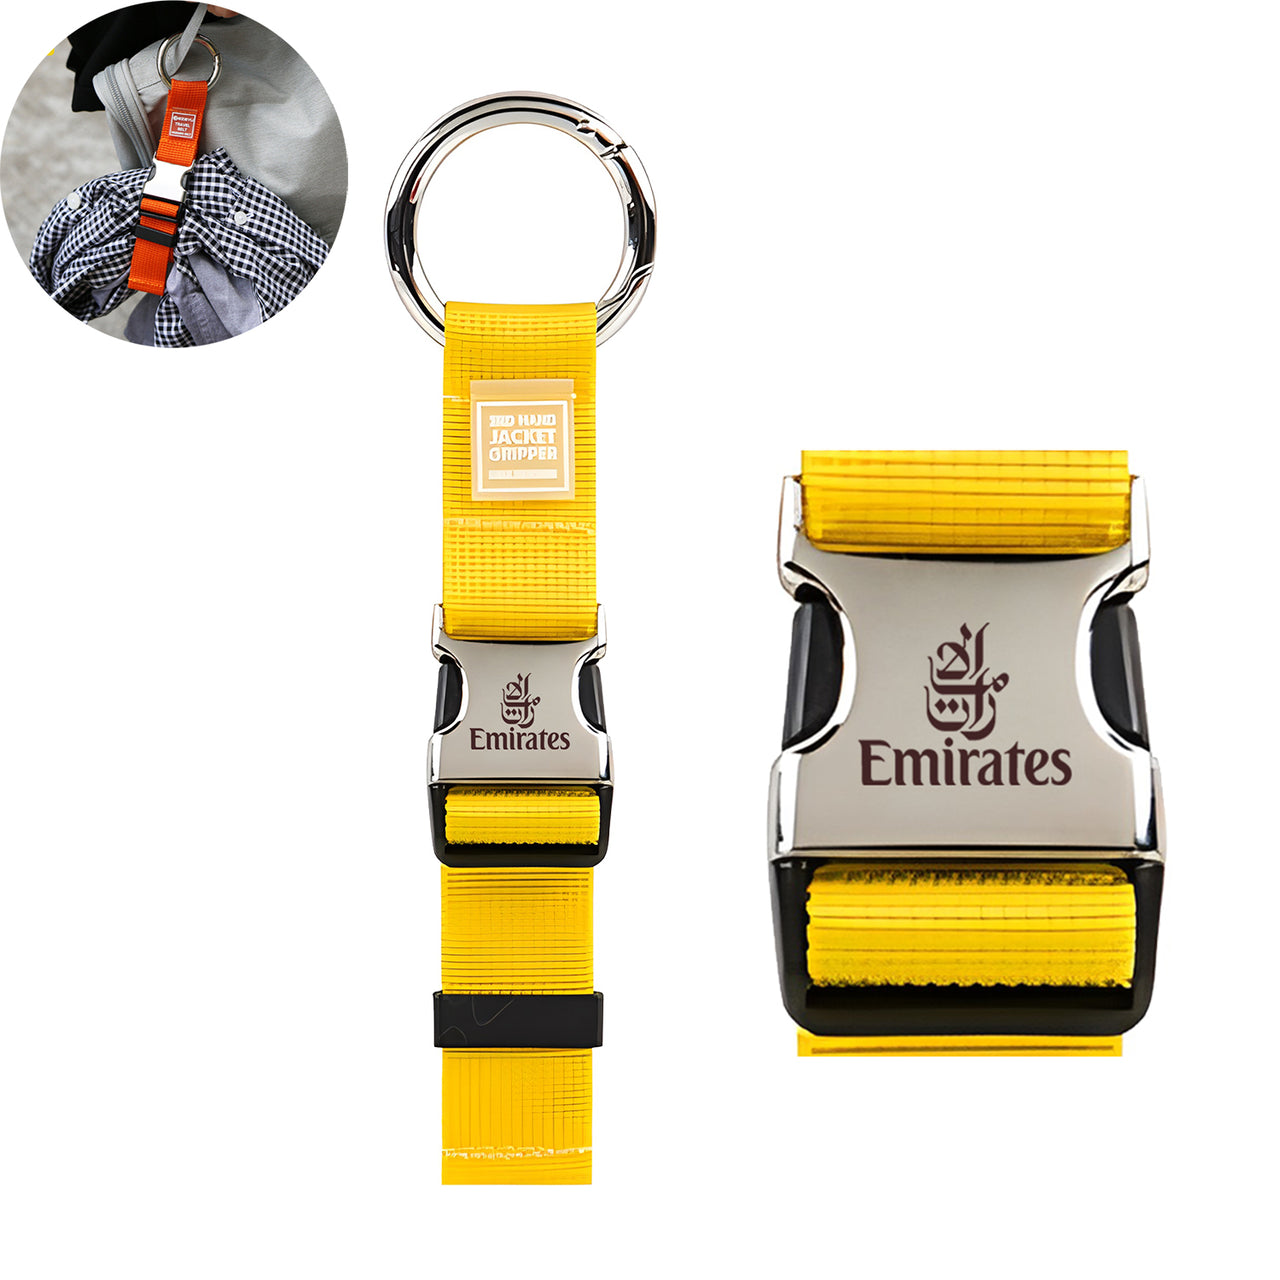 Emirates Airlines Designed Portable Luggage Strap Jacket Gripper